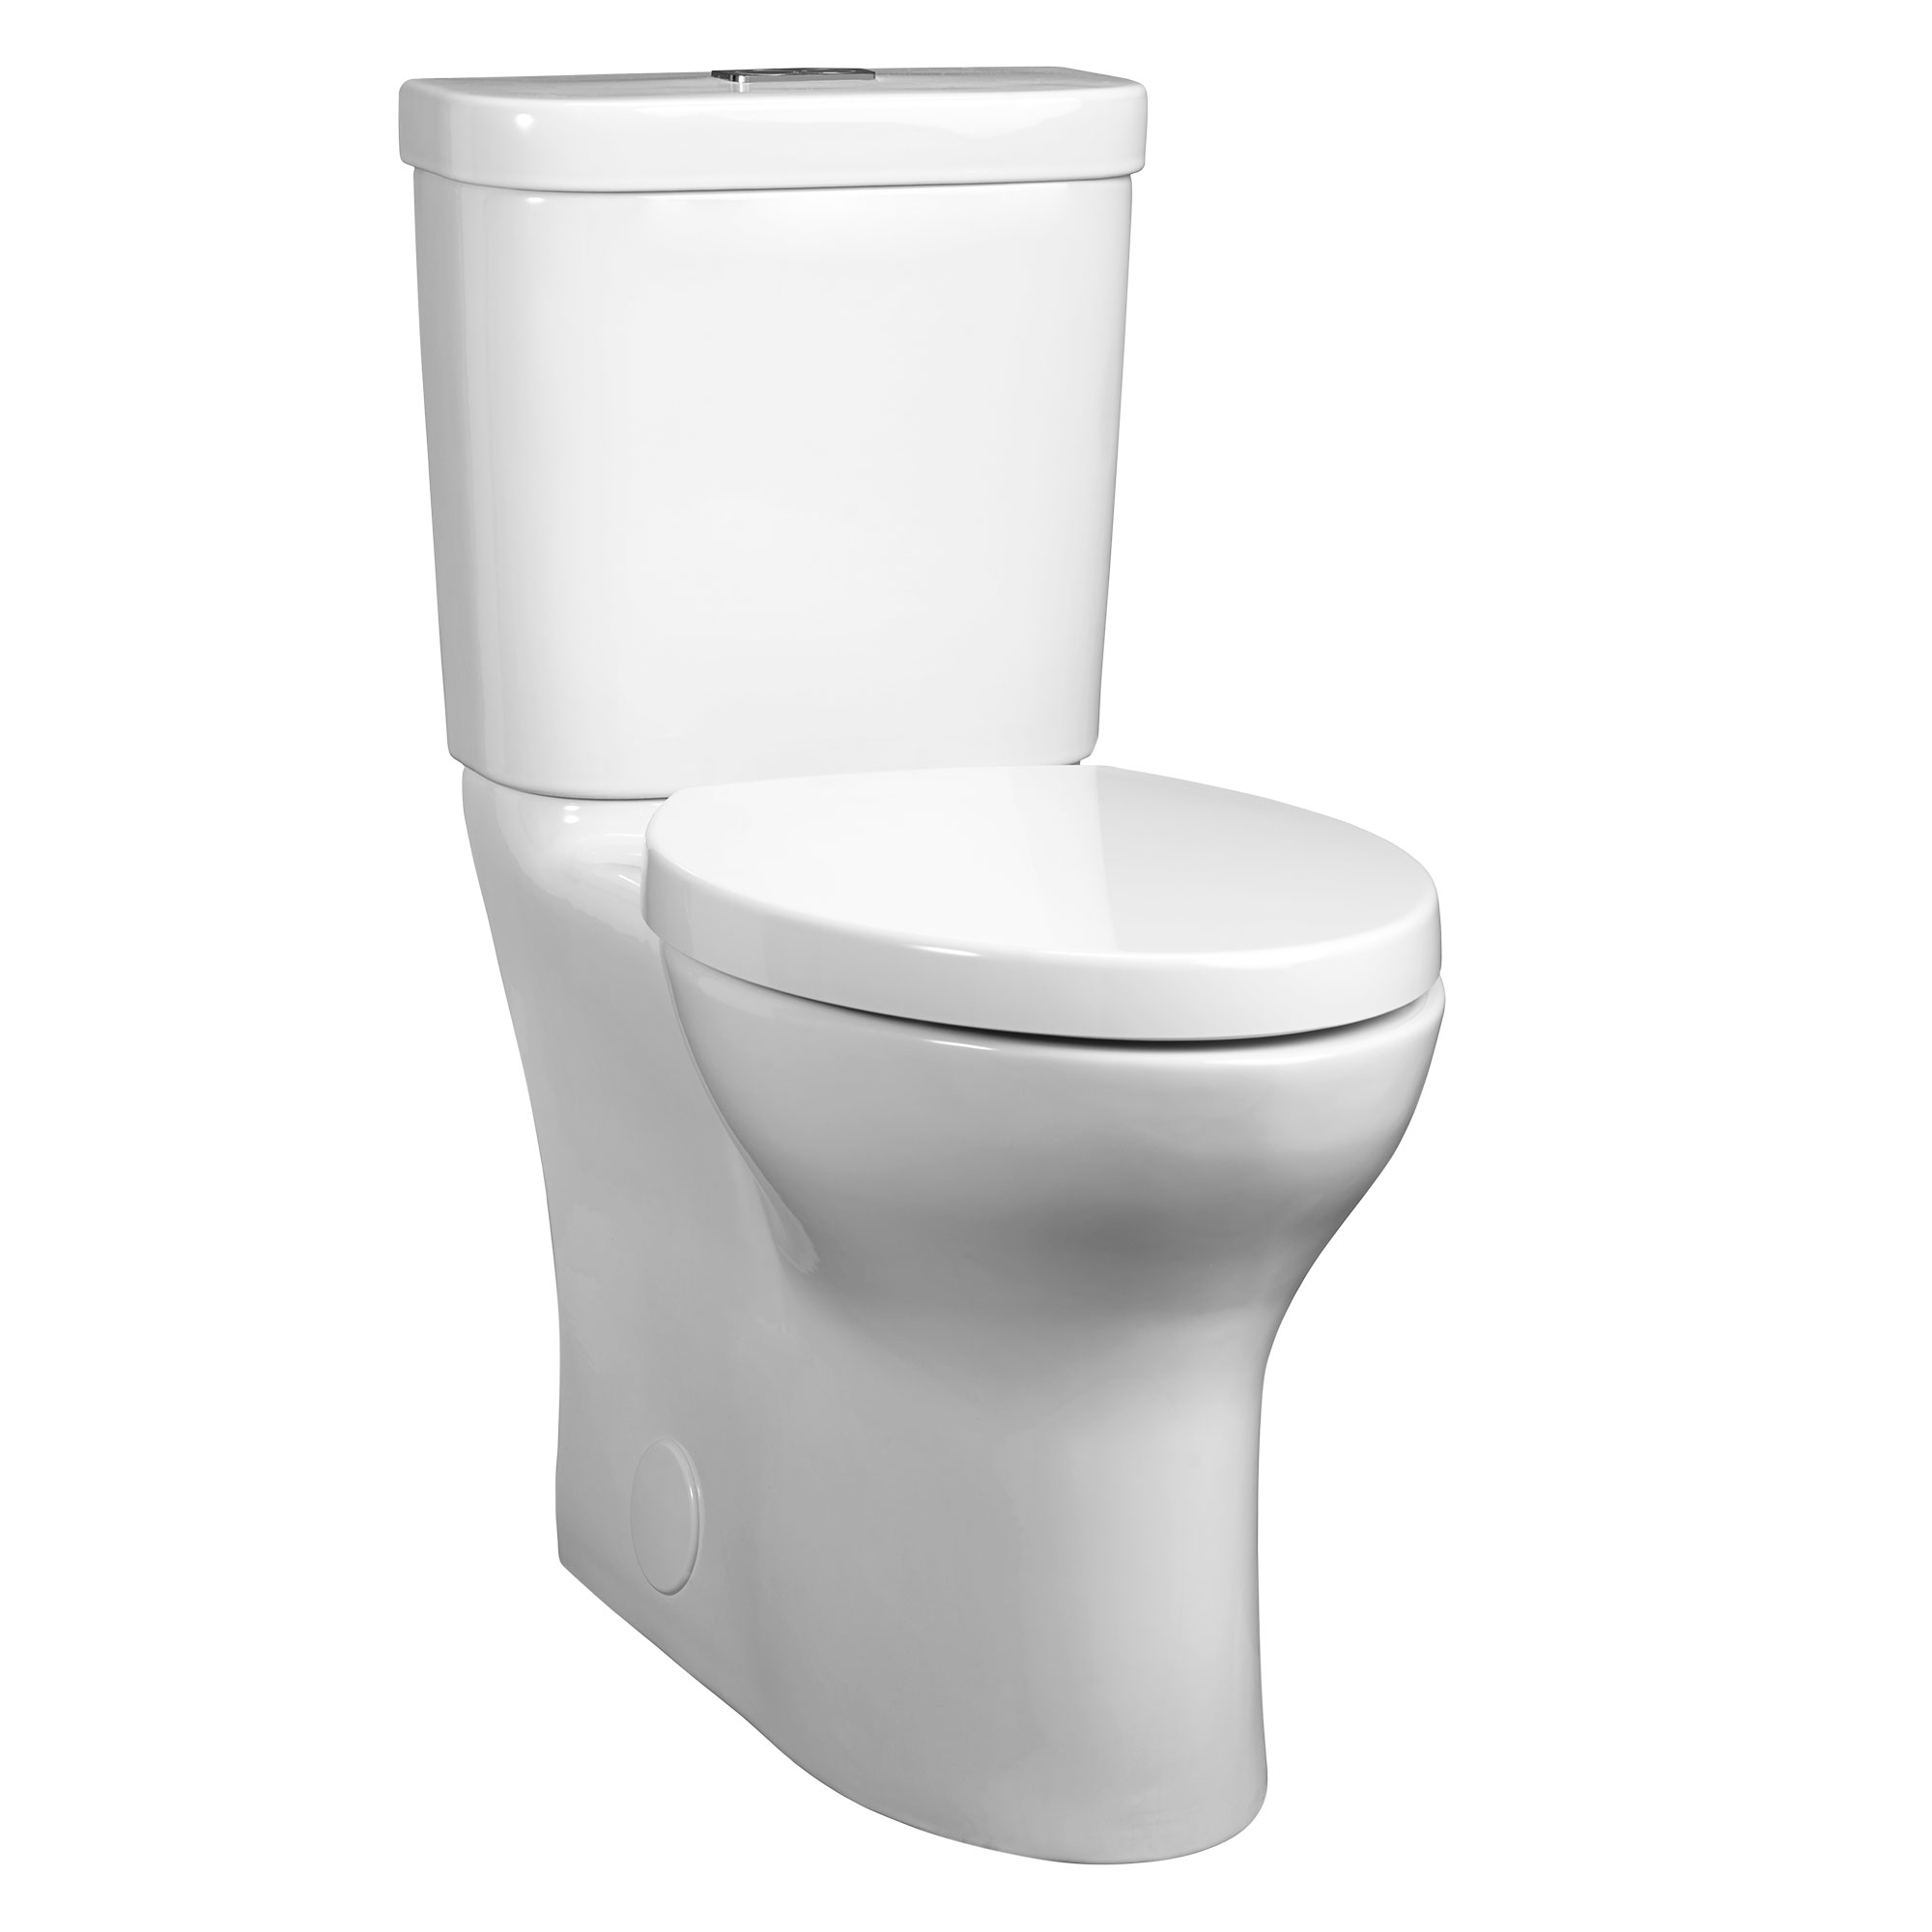 Equility® Two-Piece Dual Flush Chair-Height Elongated Toilet with Seat